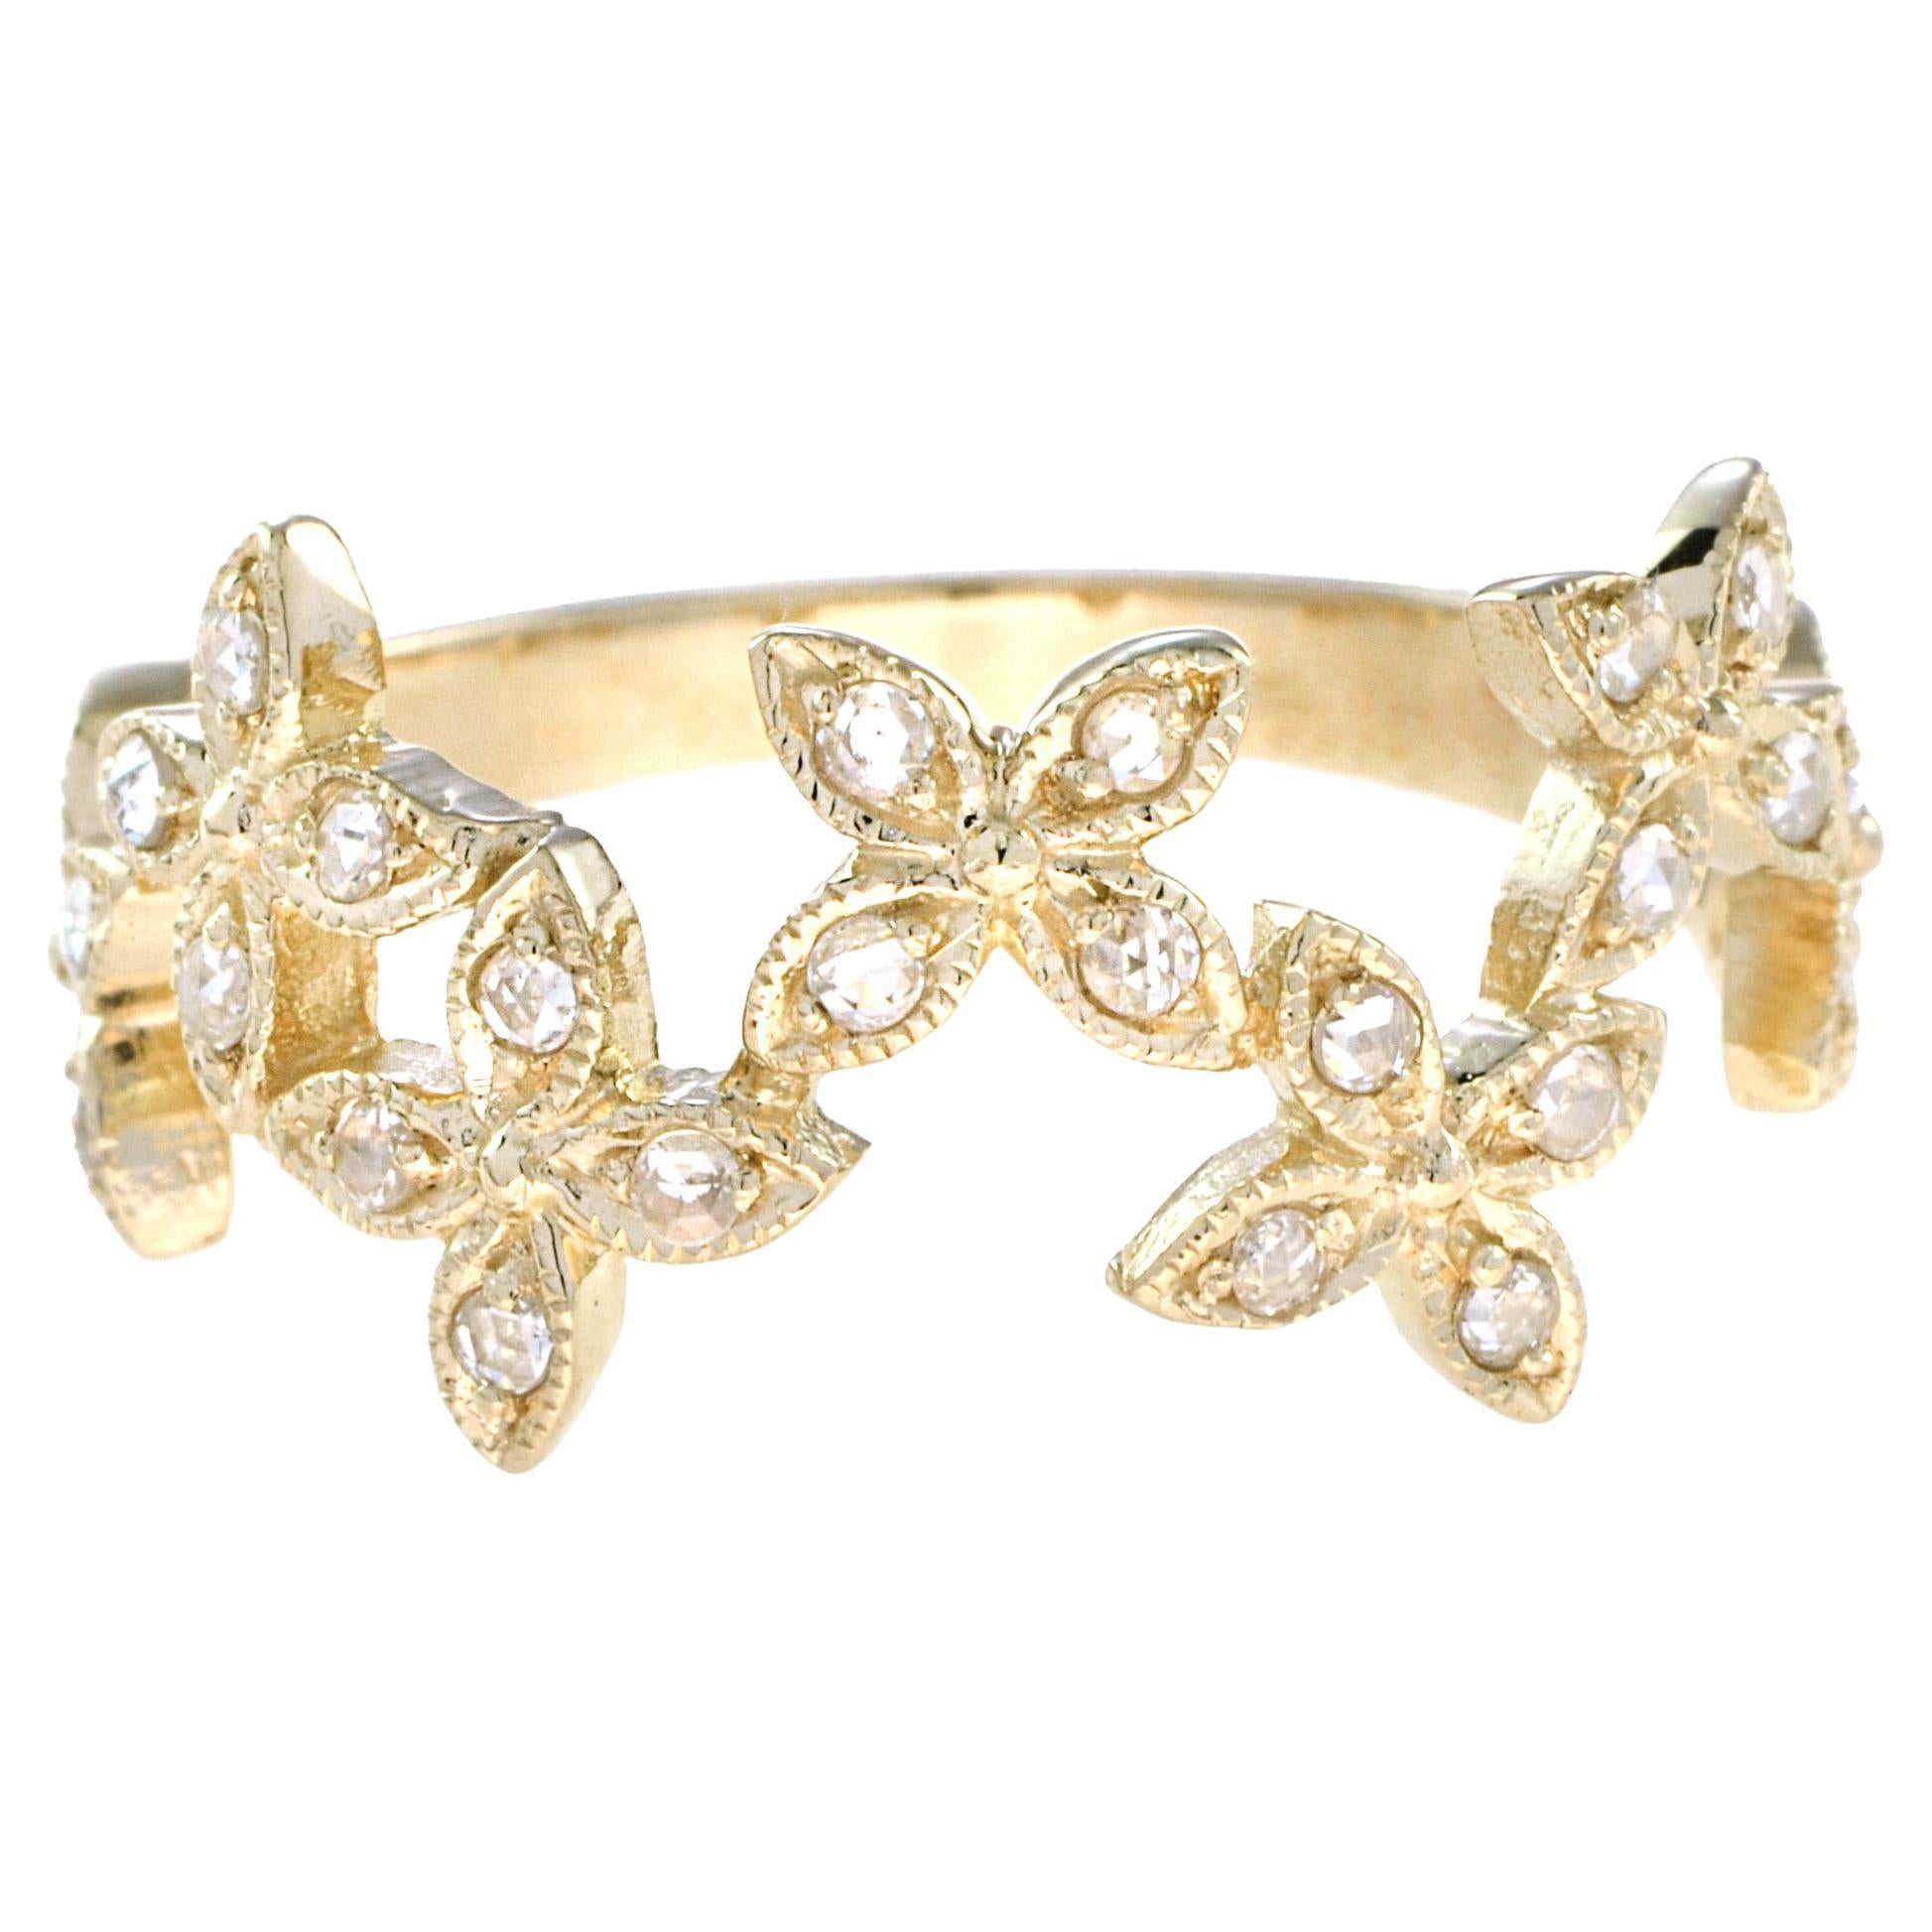 For Sale:  Vintage Style Diamond Half Eternity Flower Ring in 14K Yellow Gold